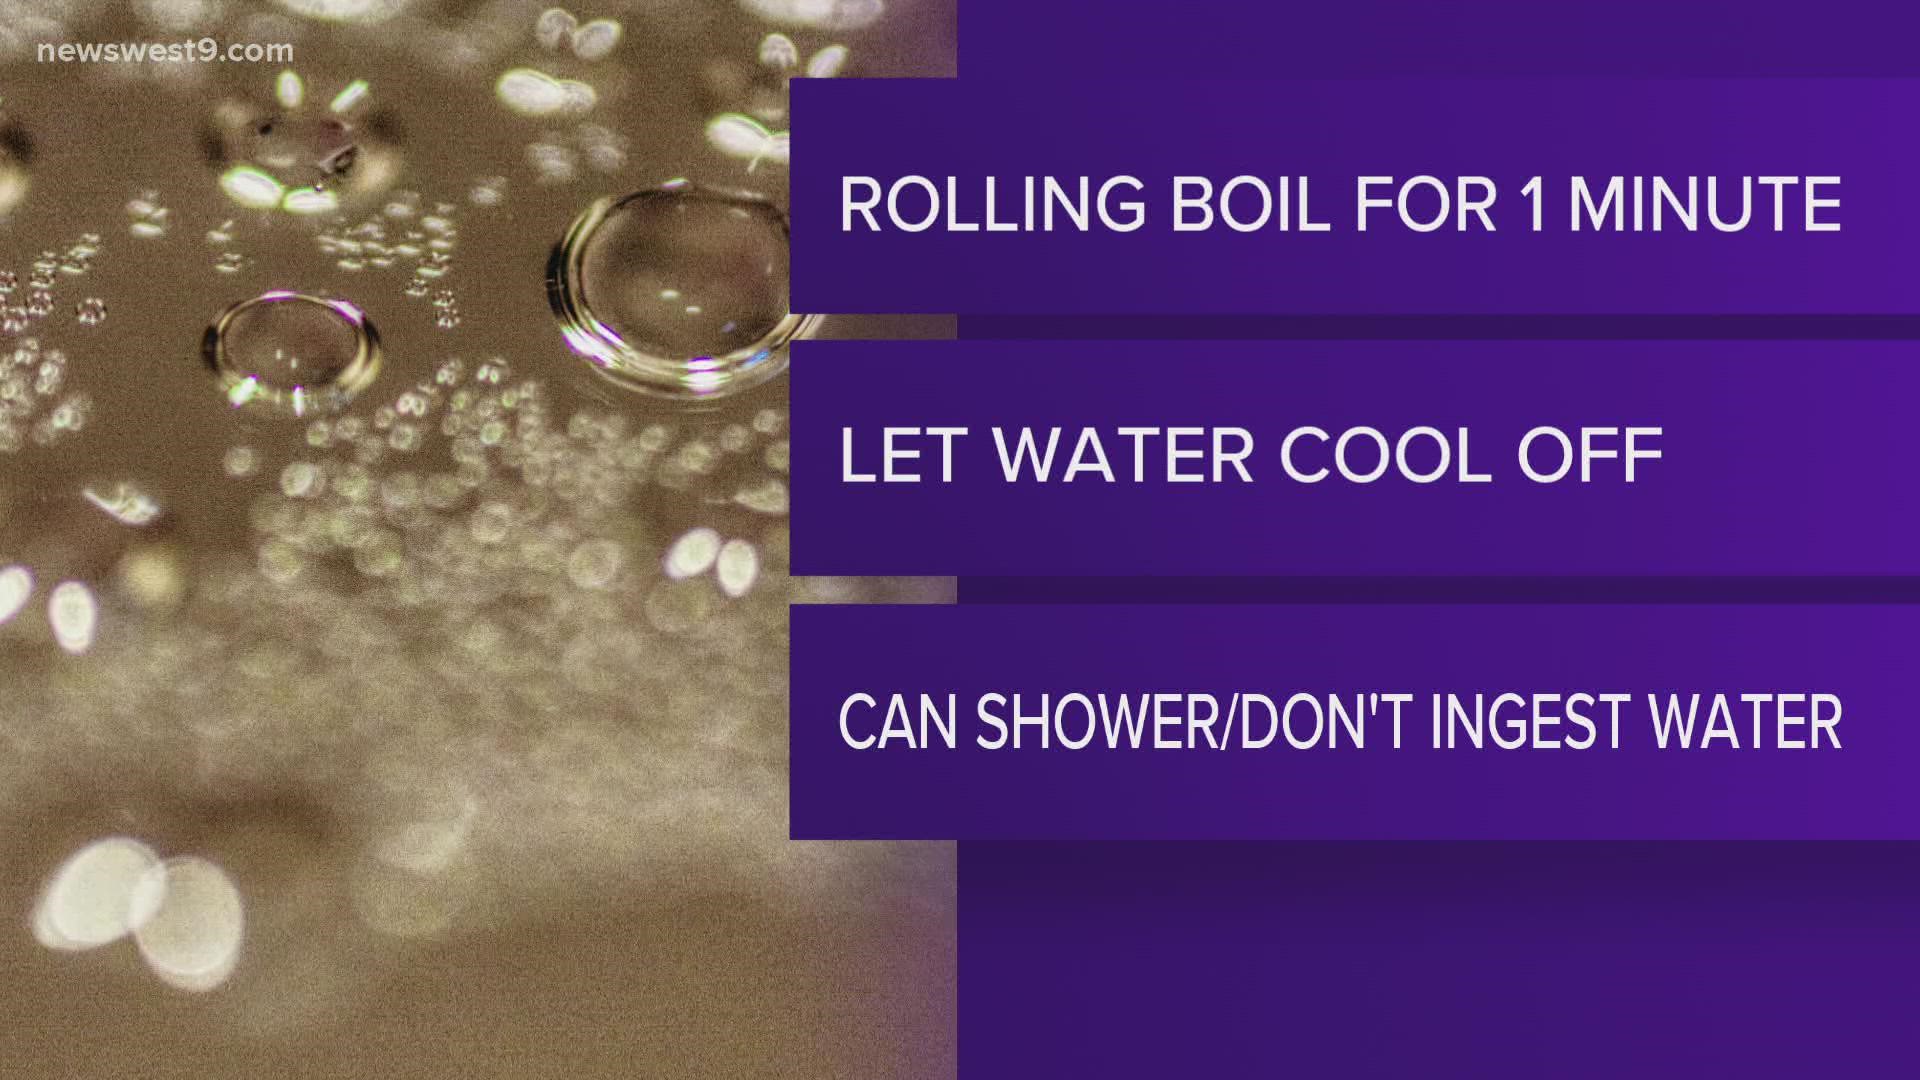 Washing dishes, showering and caring for pets all take on an extra layer of caution when you're under a boil water notice.